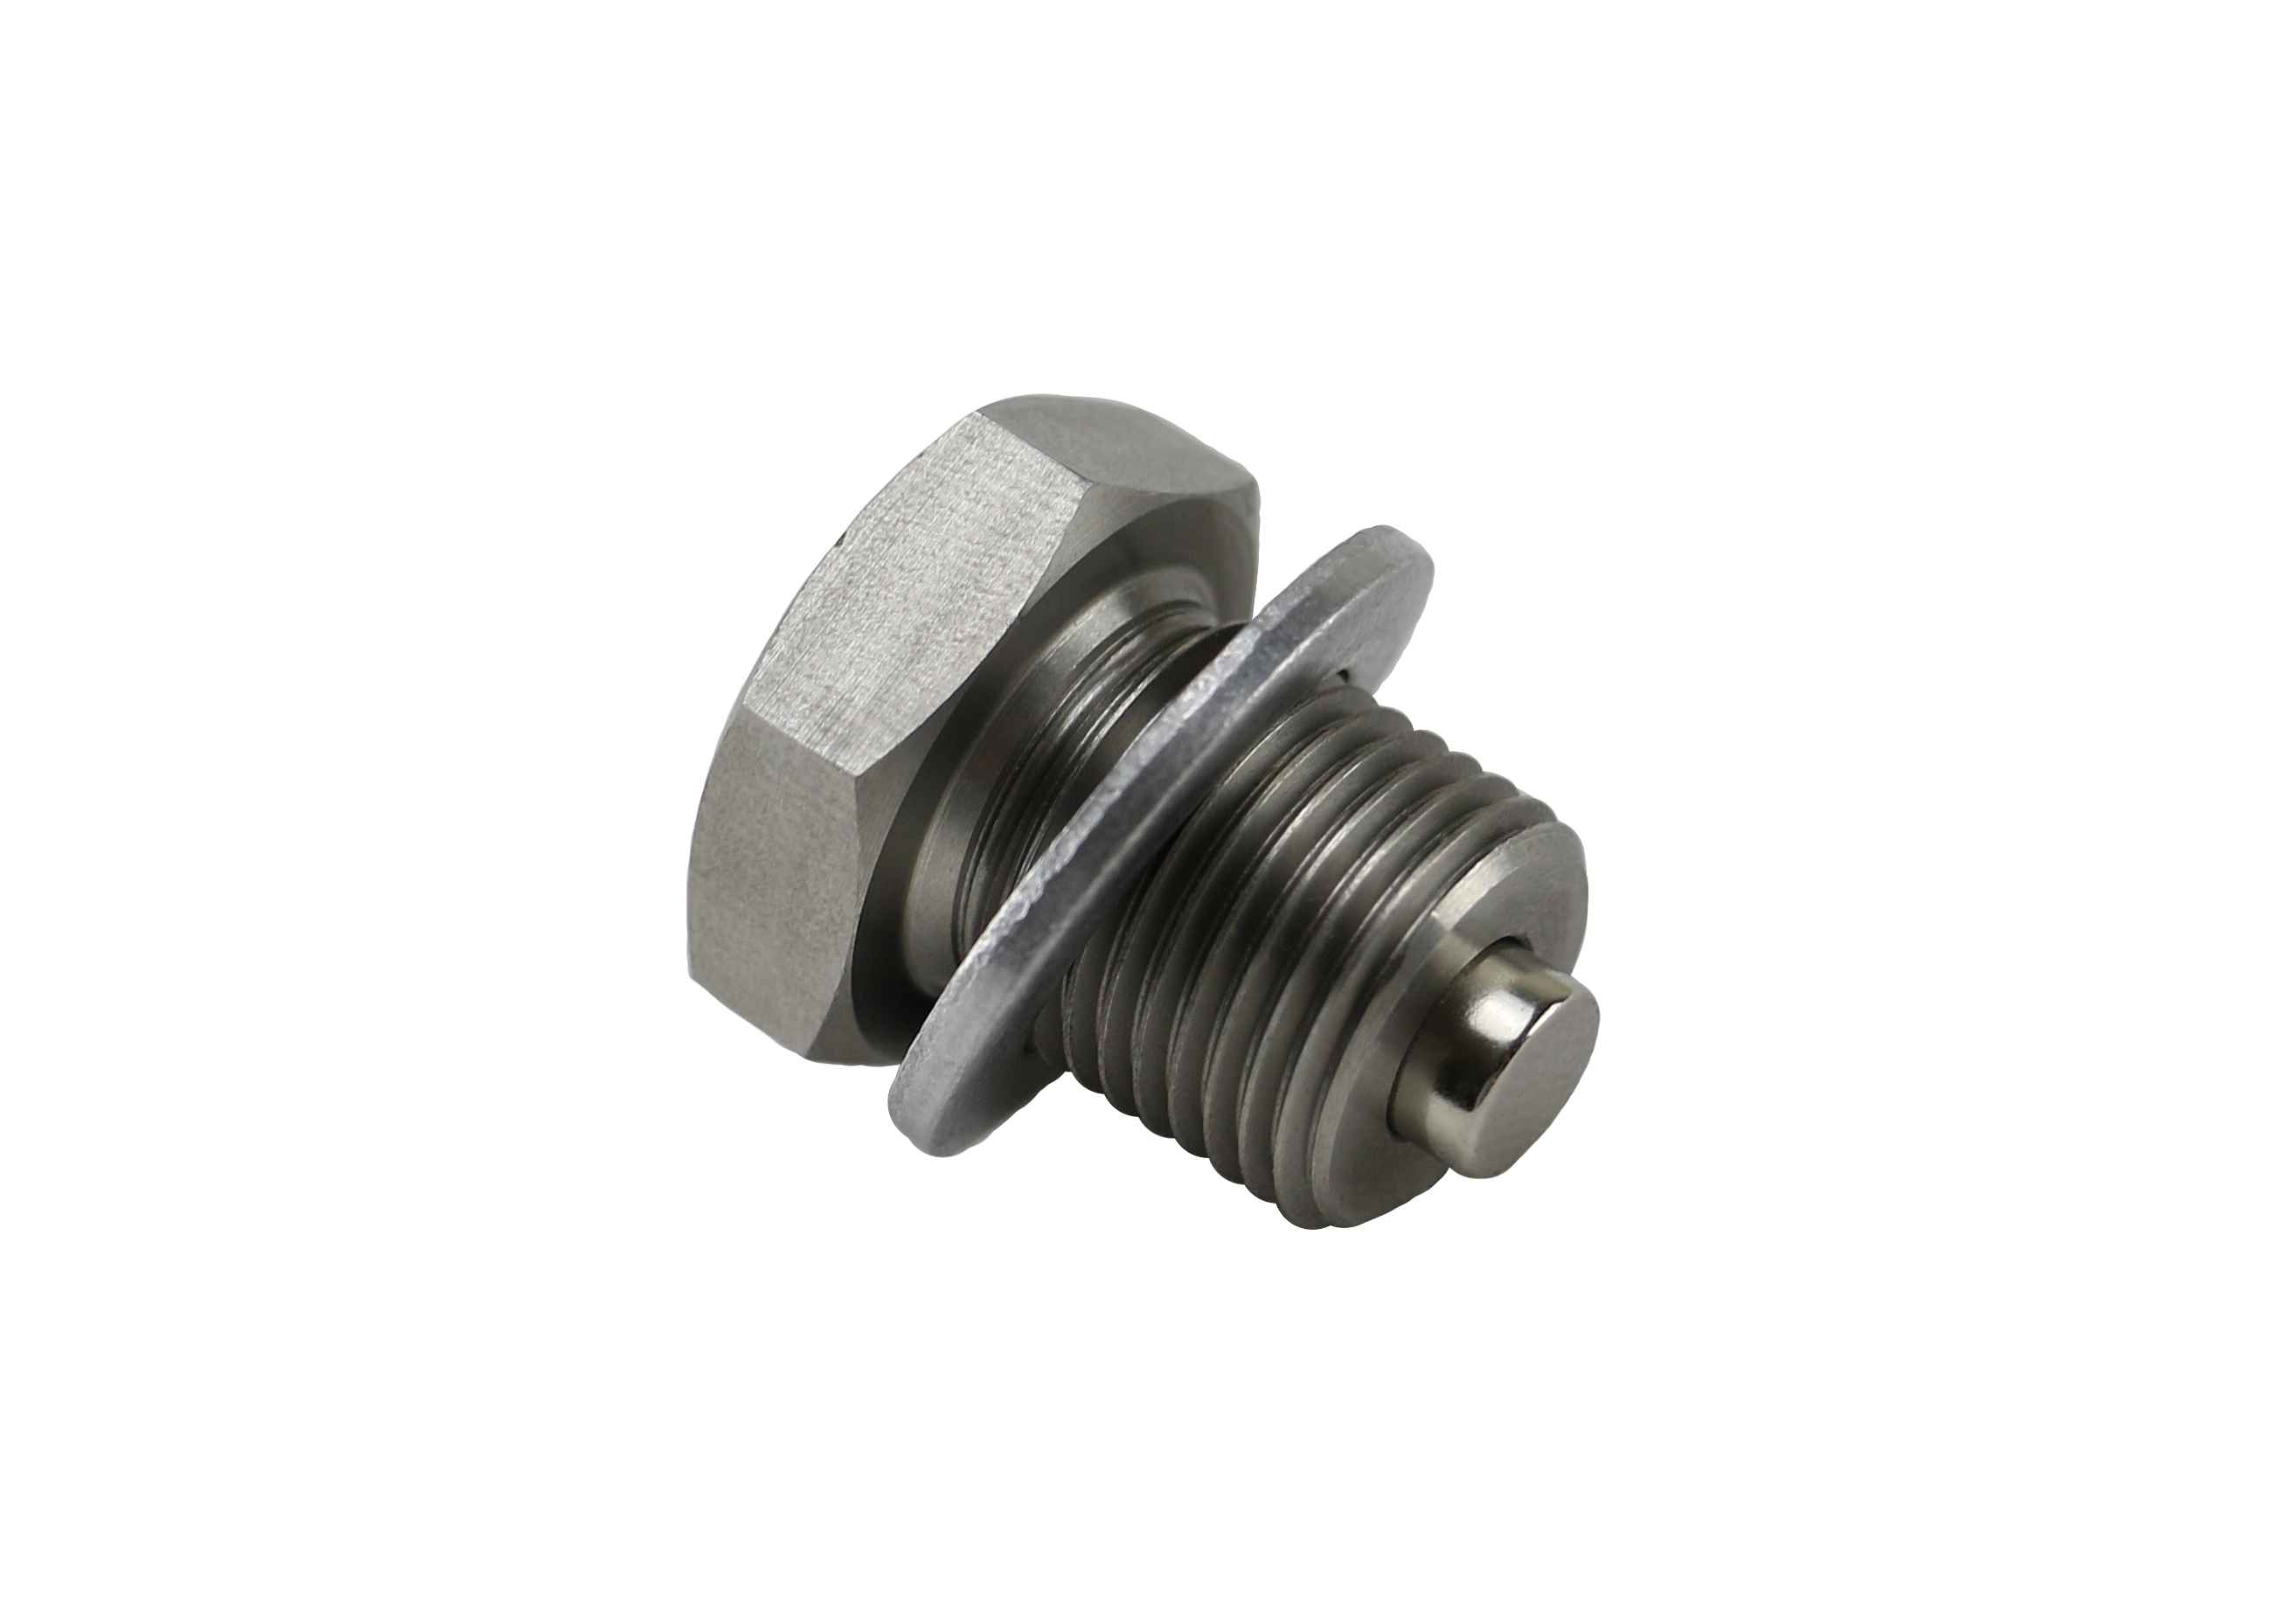 Arctic Cat Stainless Steel CHAINCASE/GEARCASE Oil Drain Plug with Neodymium Magnet  - Part Number 0812-006